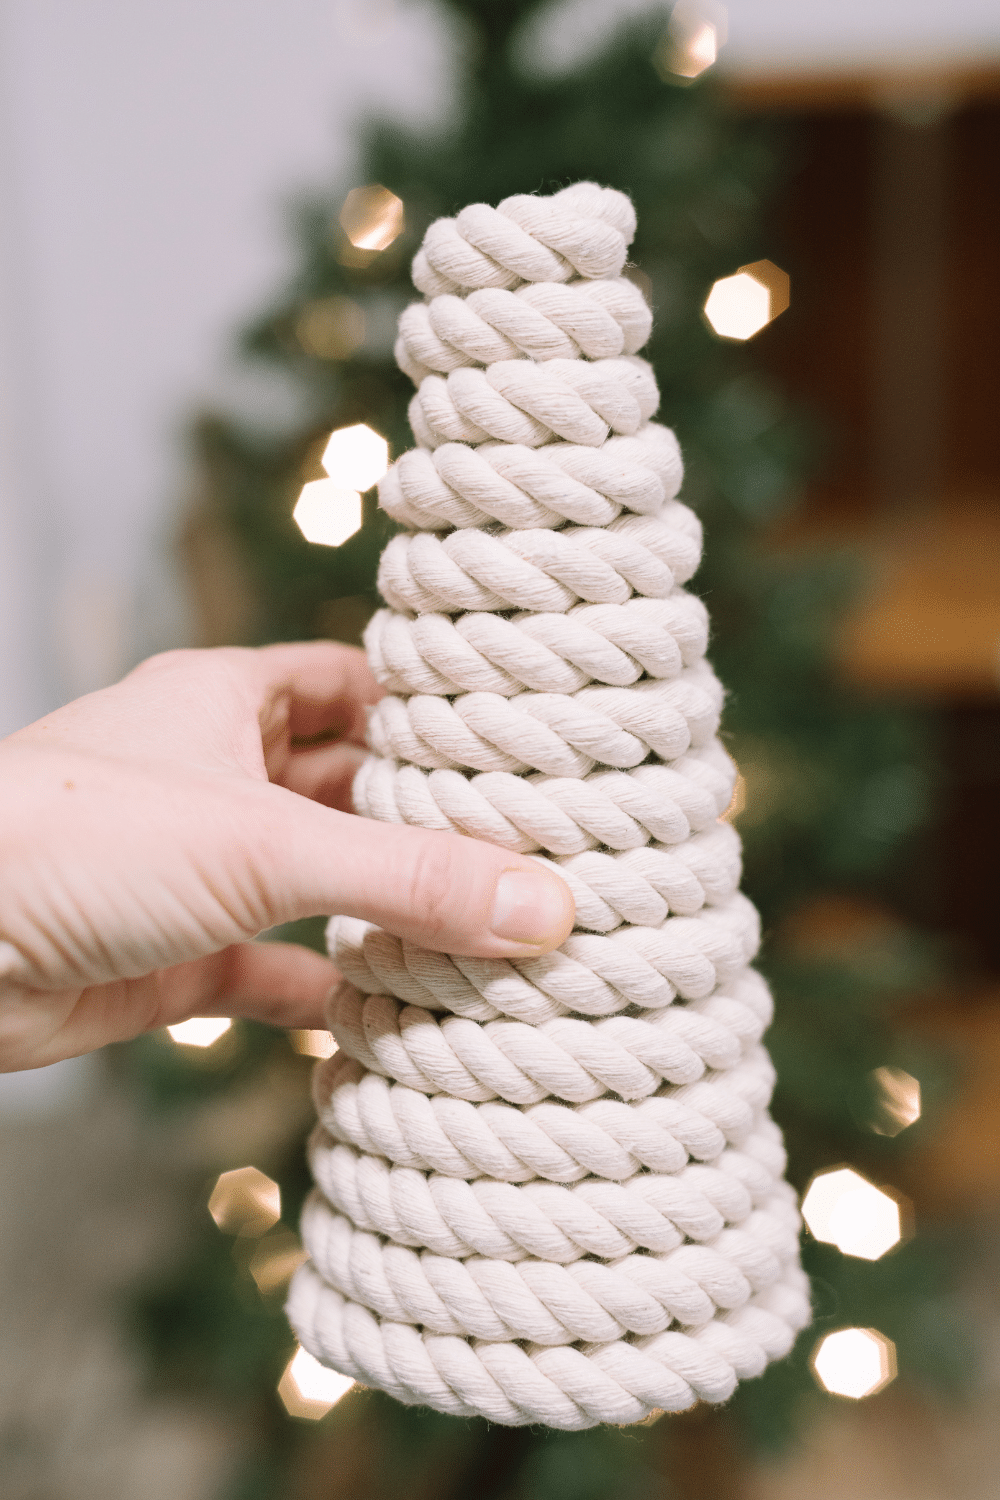 How to Make DIY Christmas Trees with Rope, Jute, Twine, and Yarn